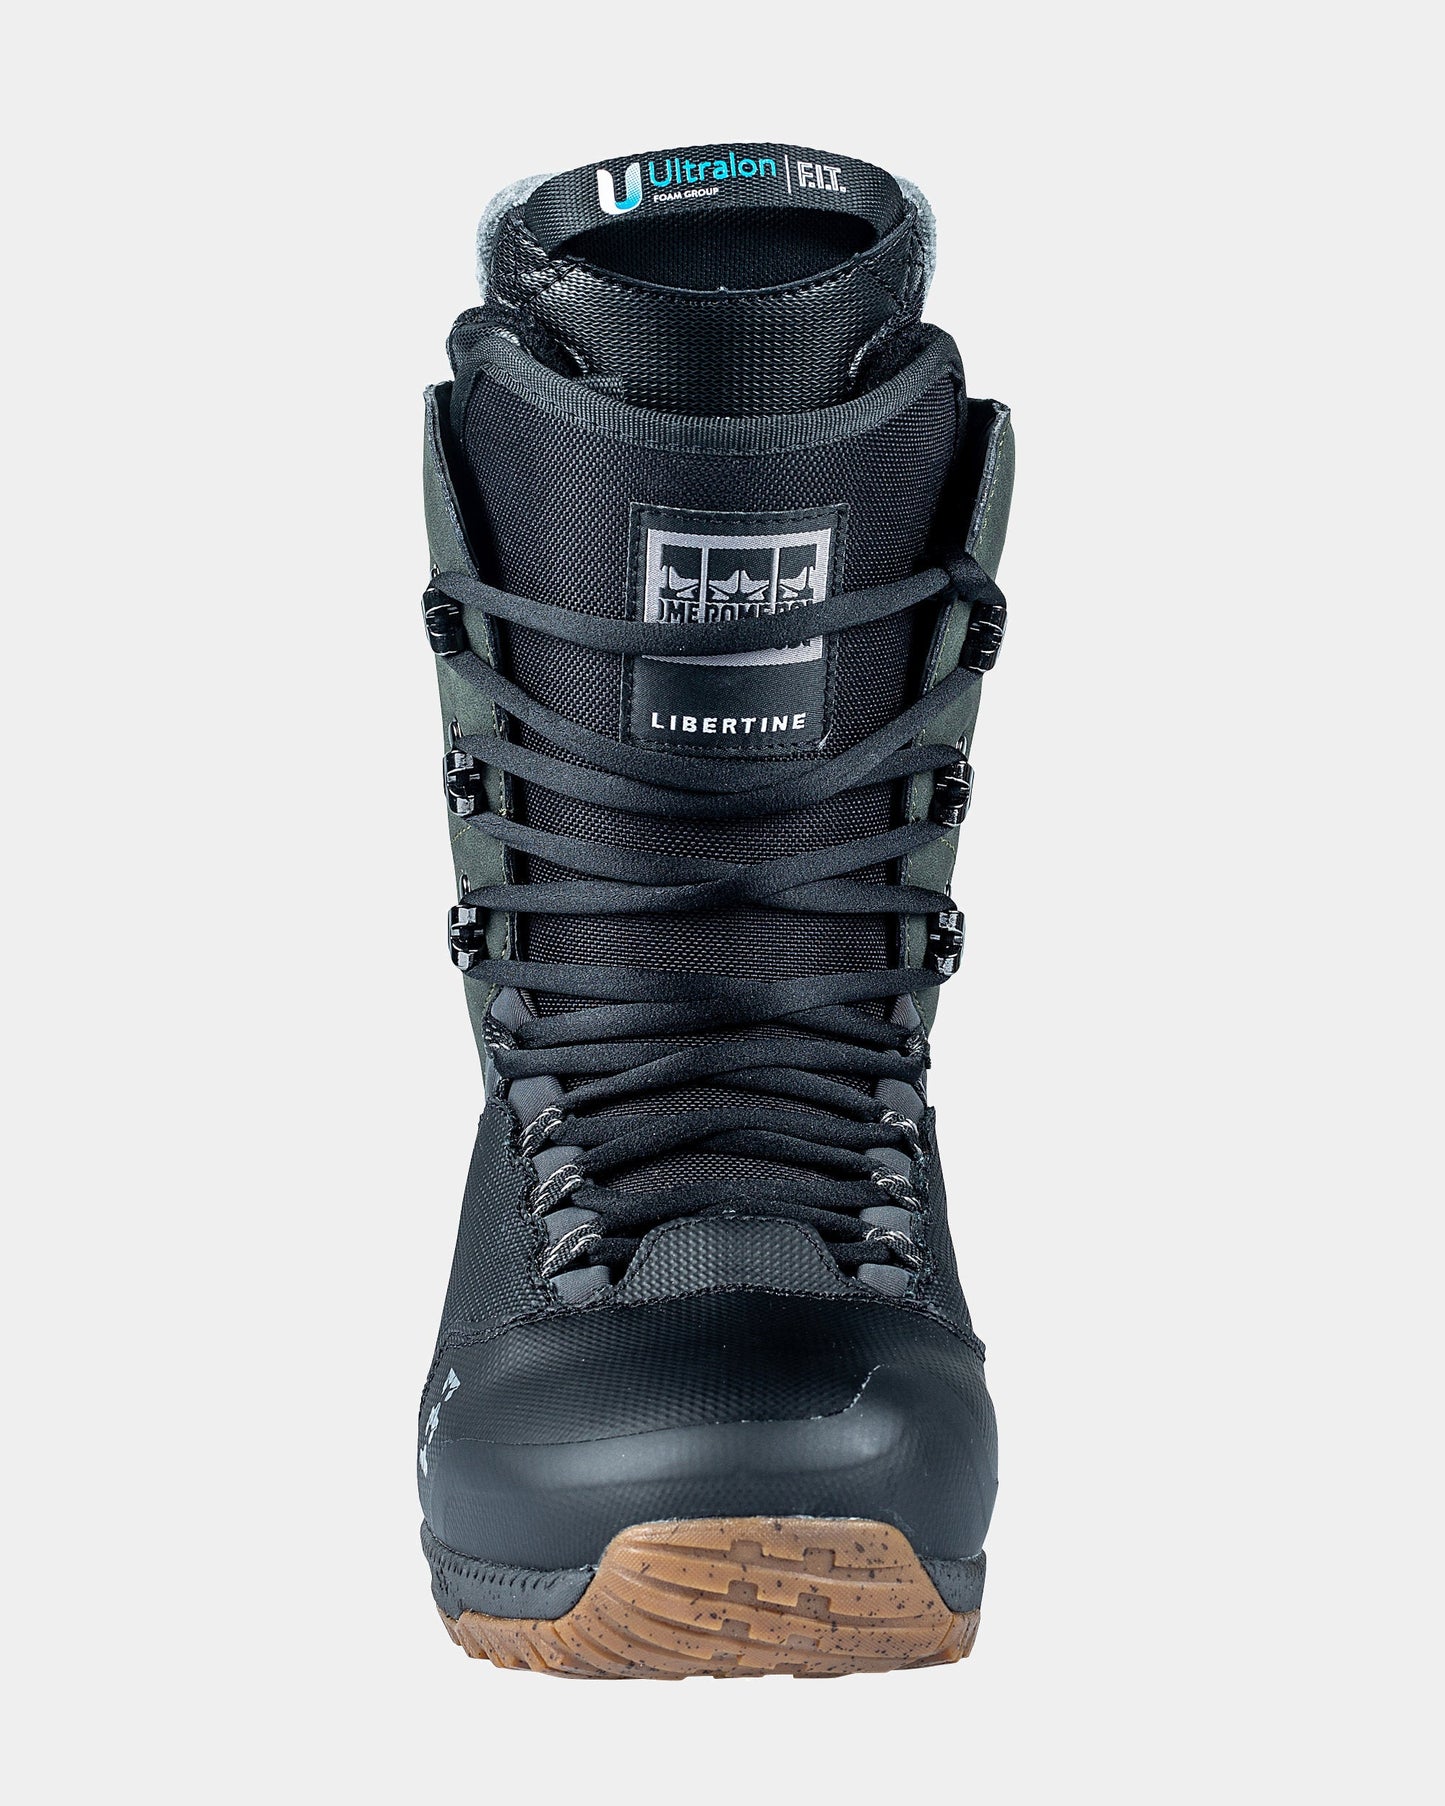 rome sds libertine 2023-2024 rome sds boots product image